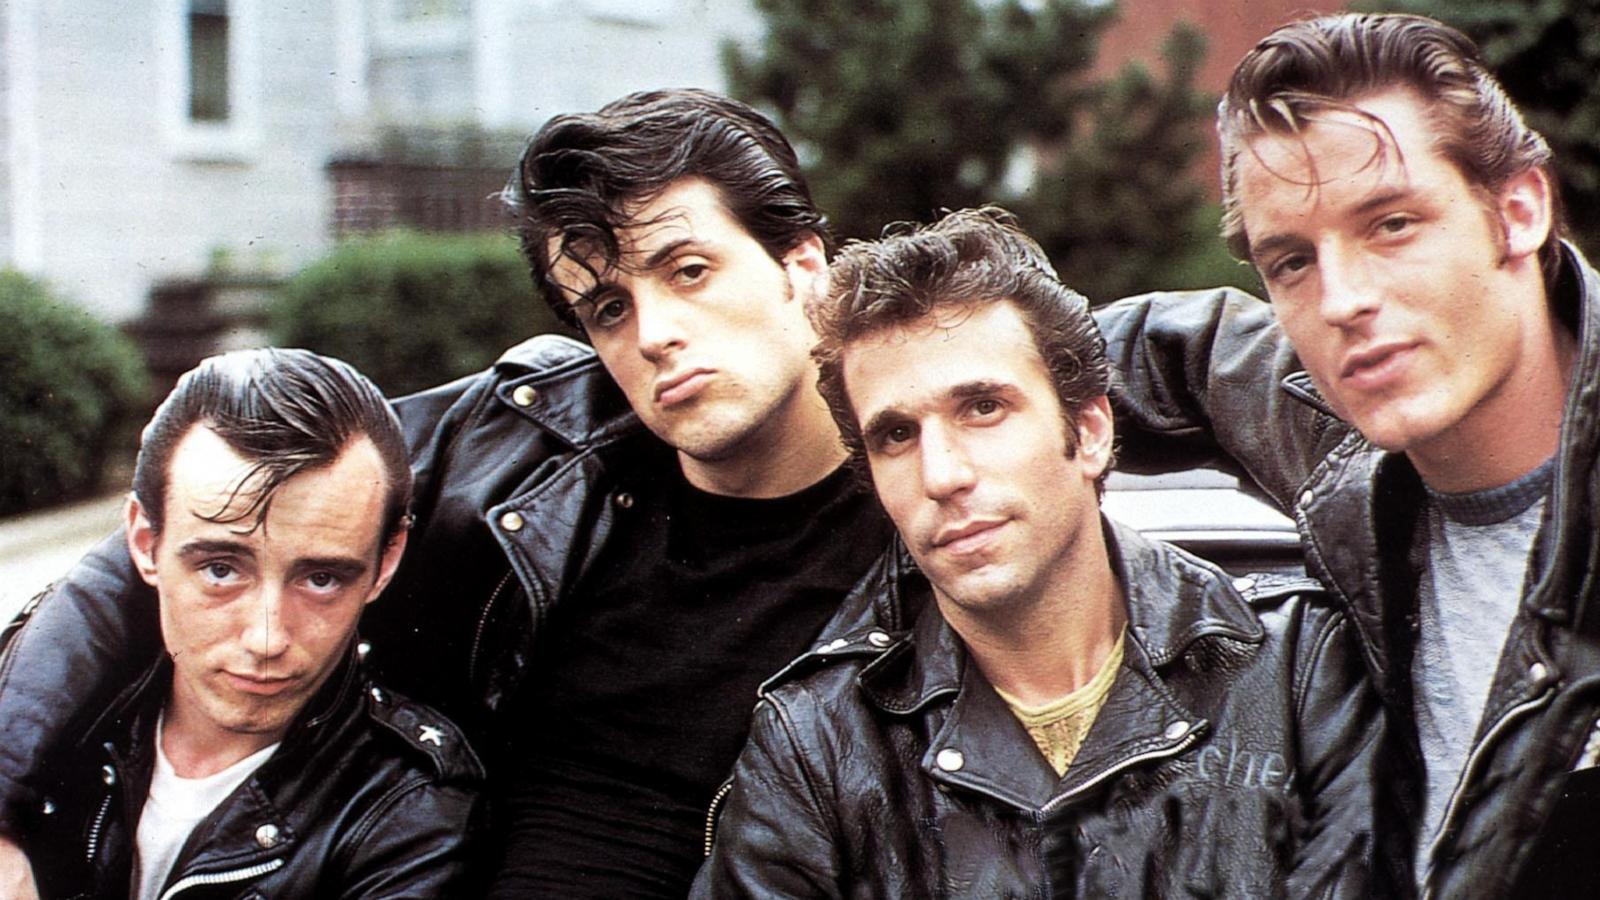 PHOTO: Paul Mace, Sylvester Stallone, Henry Winkler, and Perry King in a publicity still from "The Lords of Flatbush," 1974.